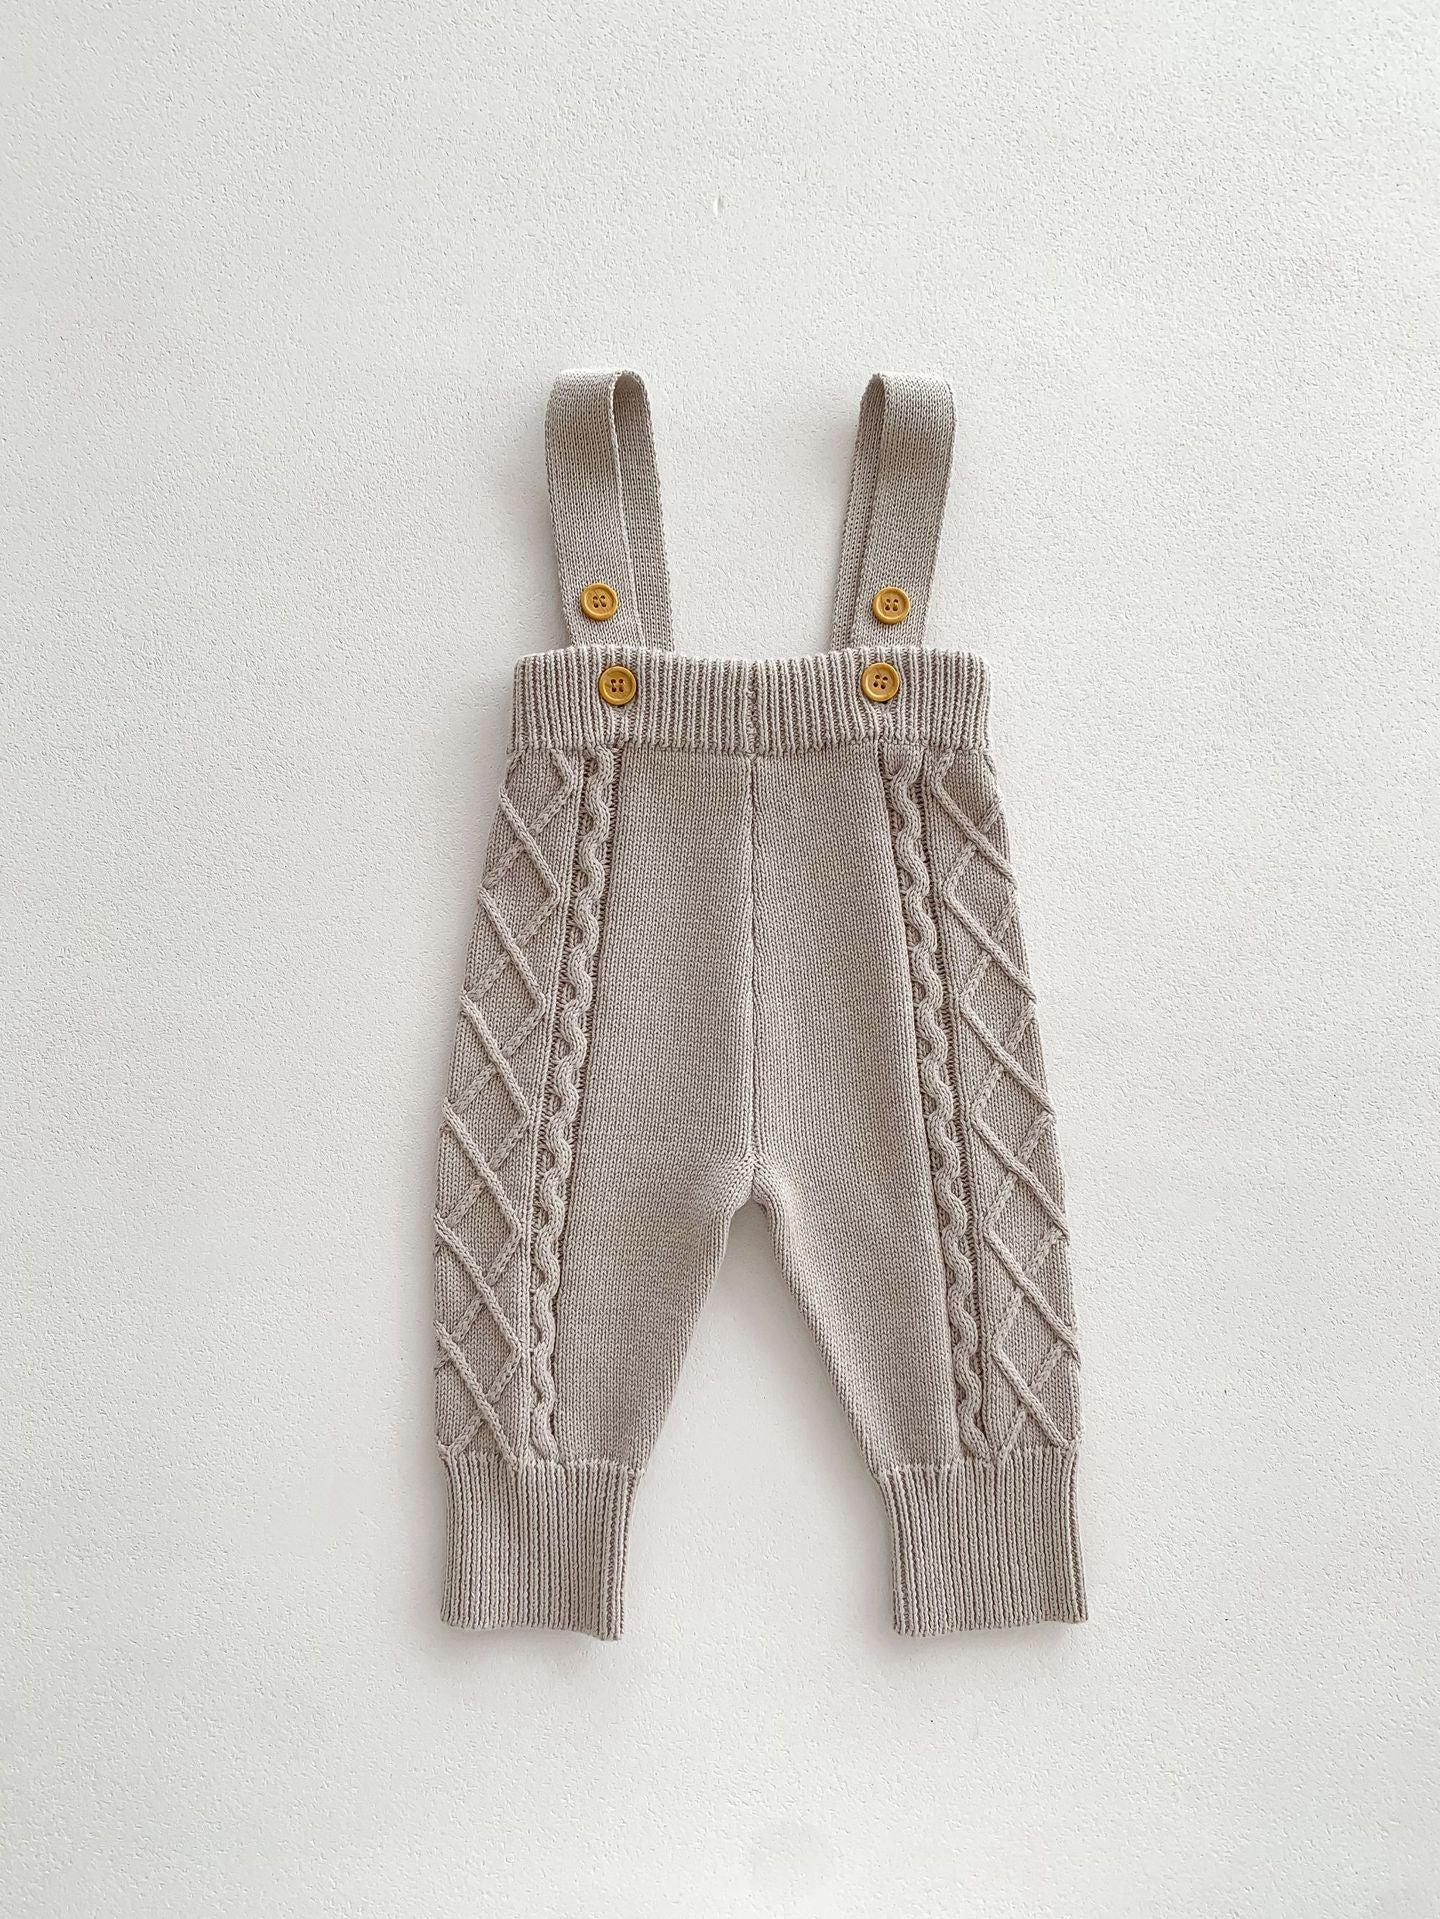 Cotton Knit Baby Overall and/or Sweater